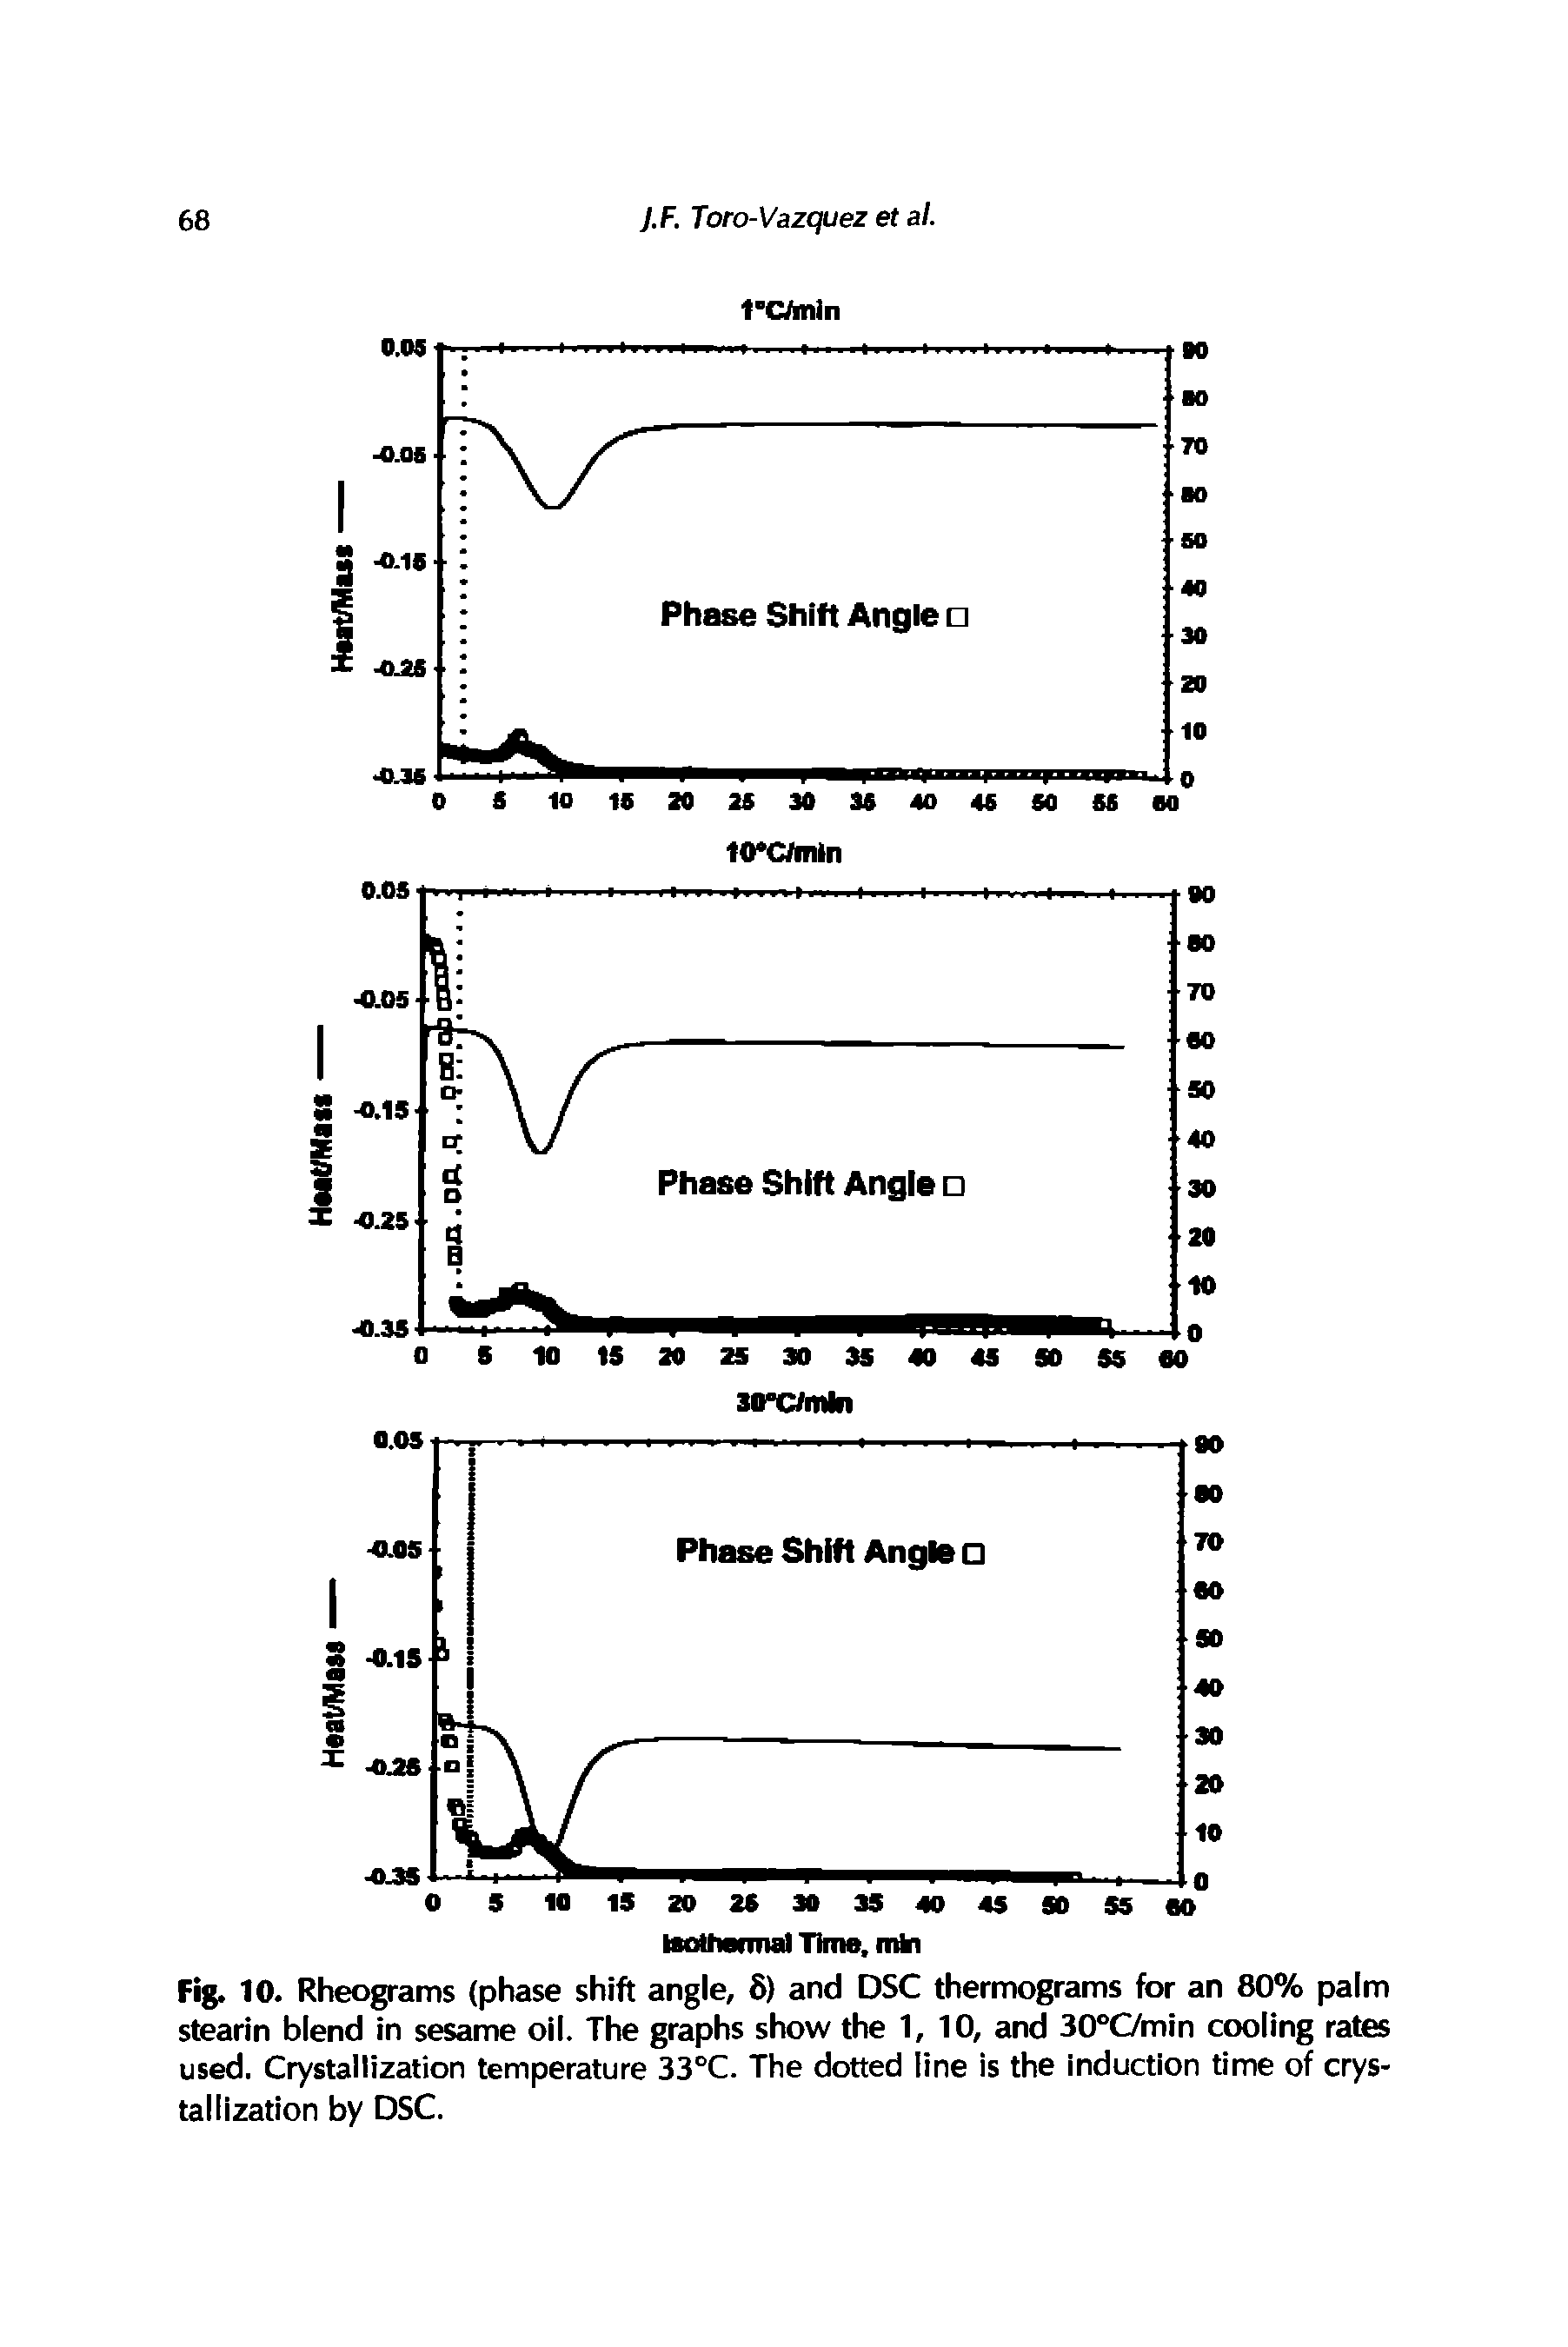 Fig. 10. Rheograms (phase shift angle, 8) and DSC thermograms for an 80% palm stearin blend in sesame oil. The graphs show the 1,10, and 30°C/min cooling rates used. Crystallization temperature 33°C. The dotted line is the induction time of crystallization by DSC.